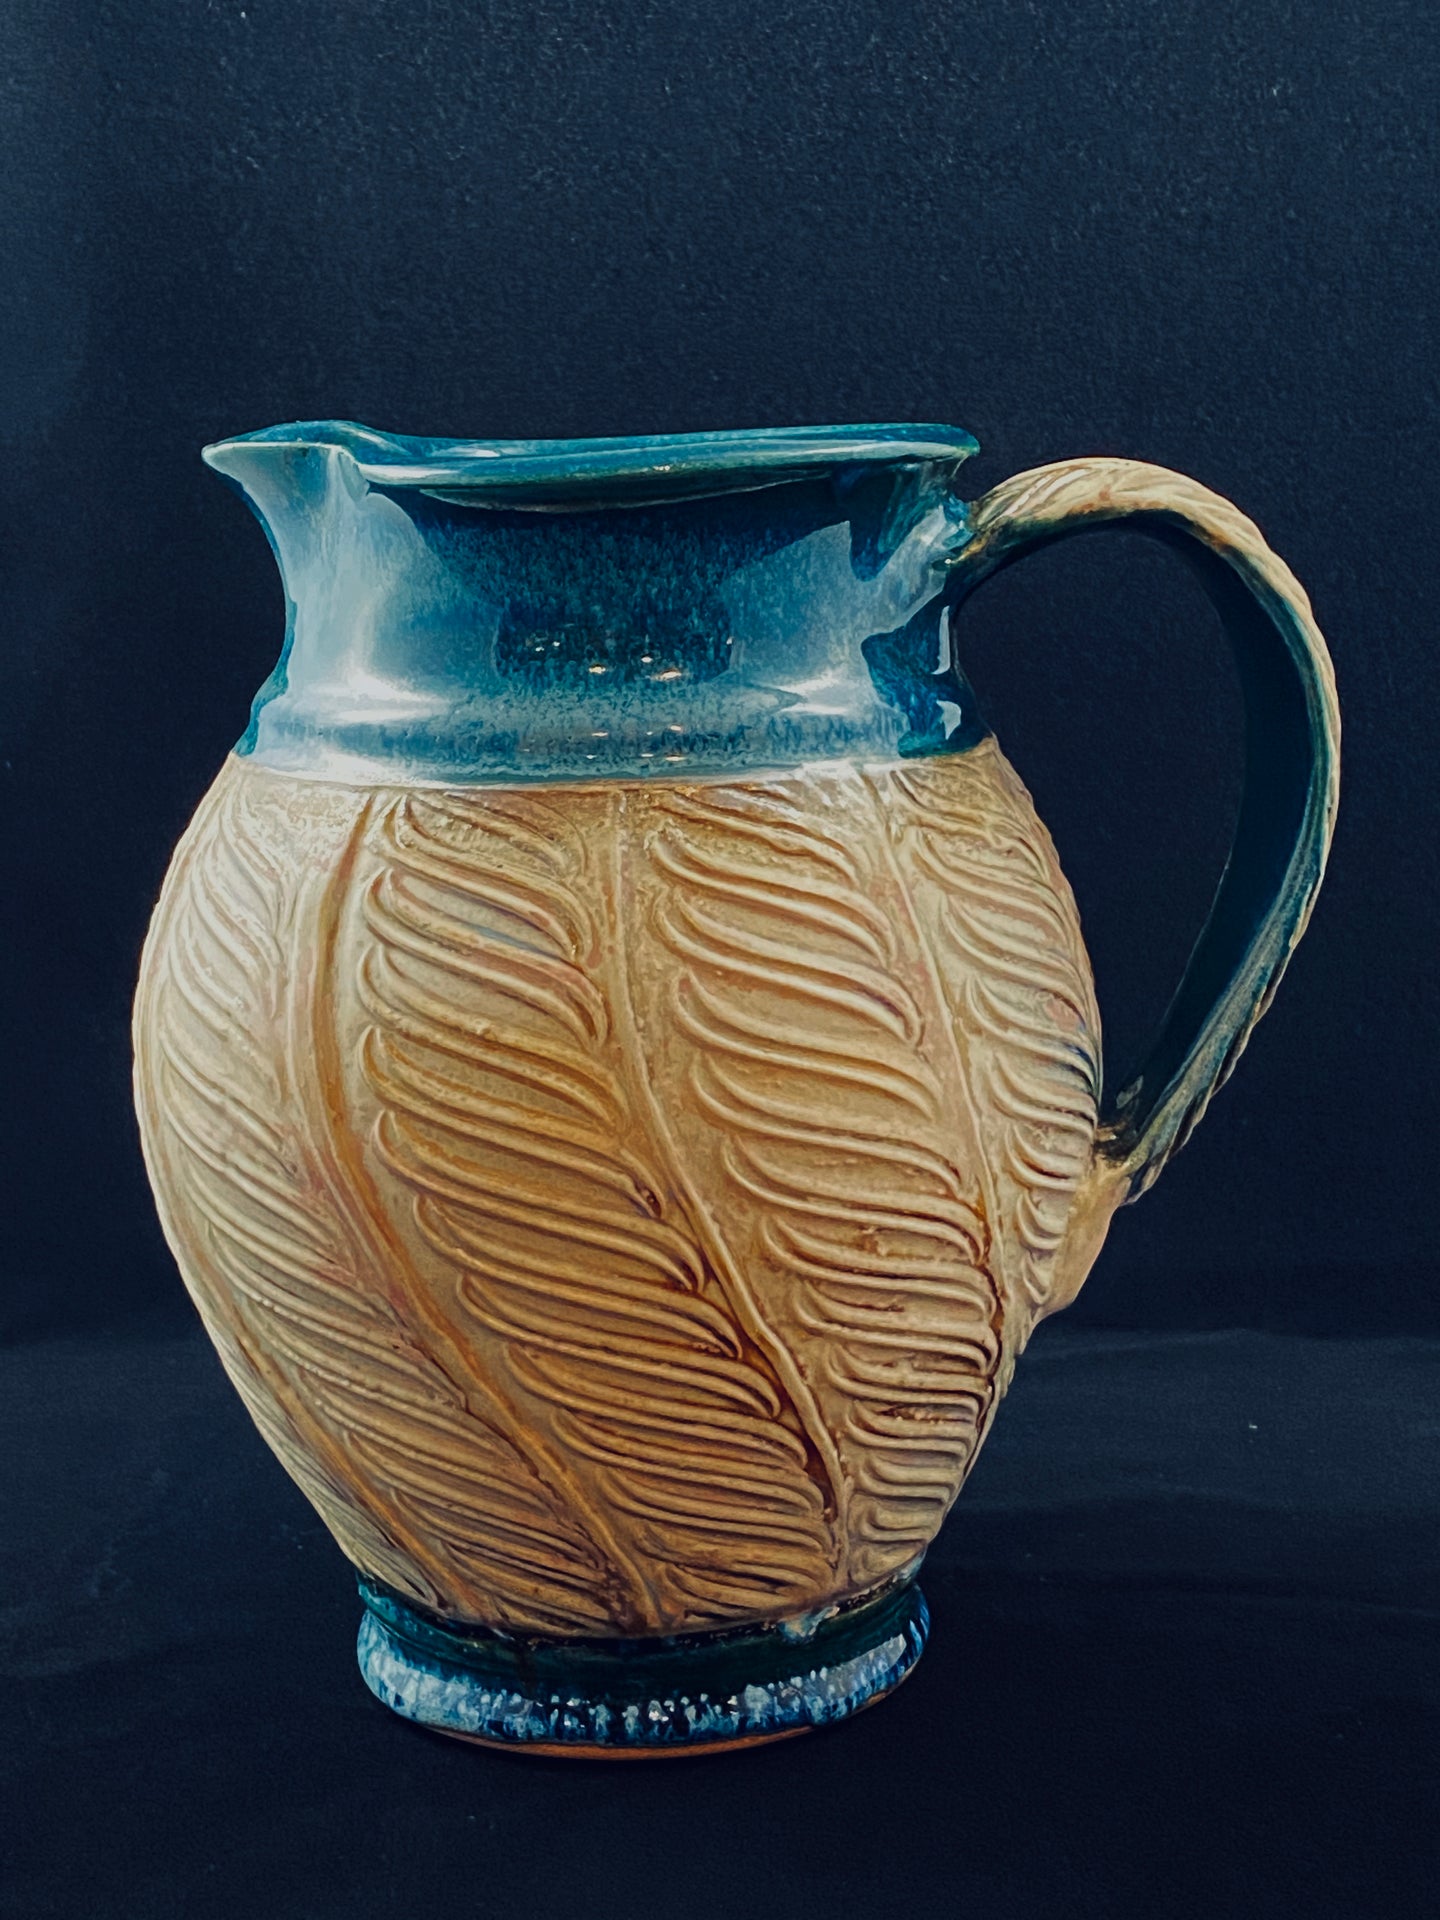 Textured Turquoise Pitcher